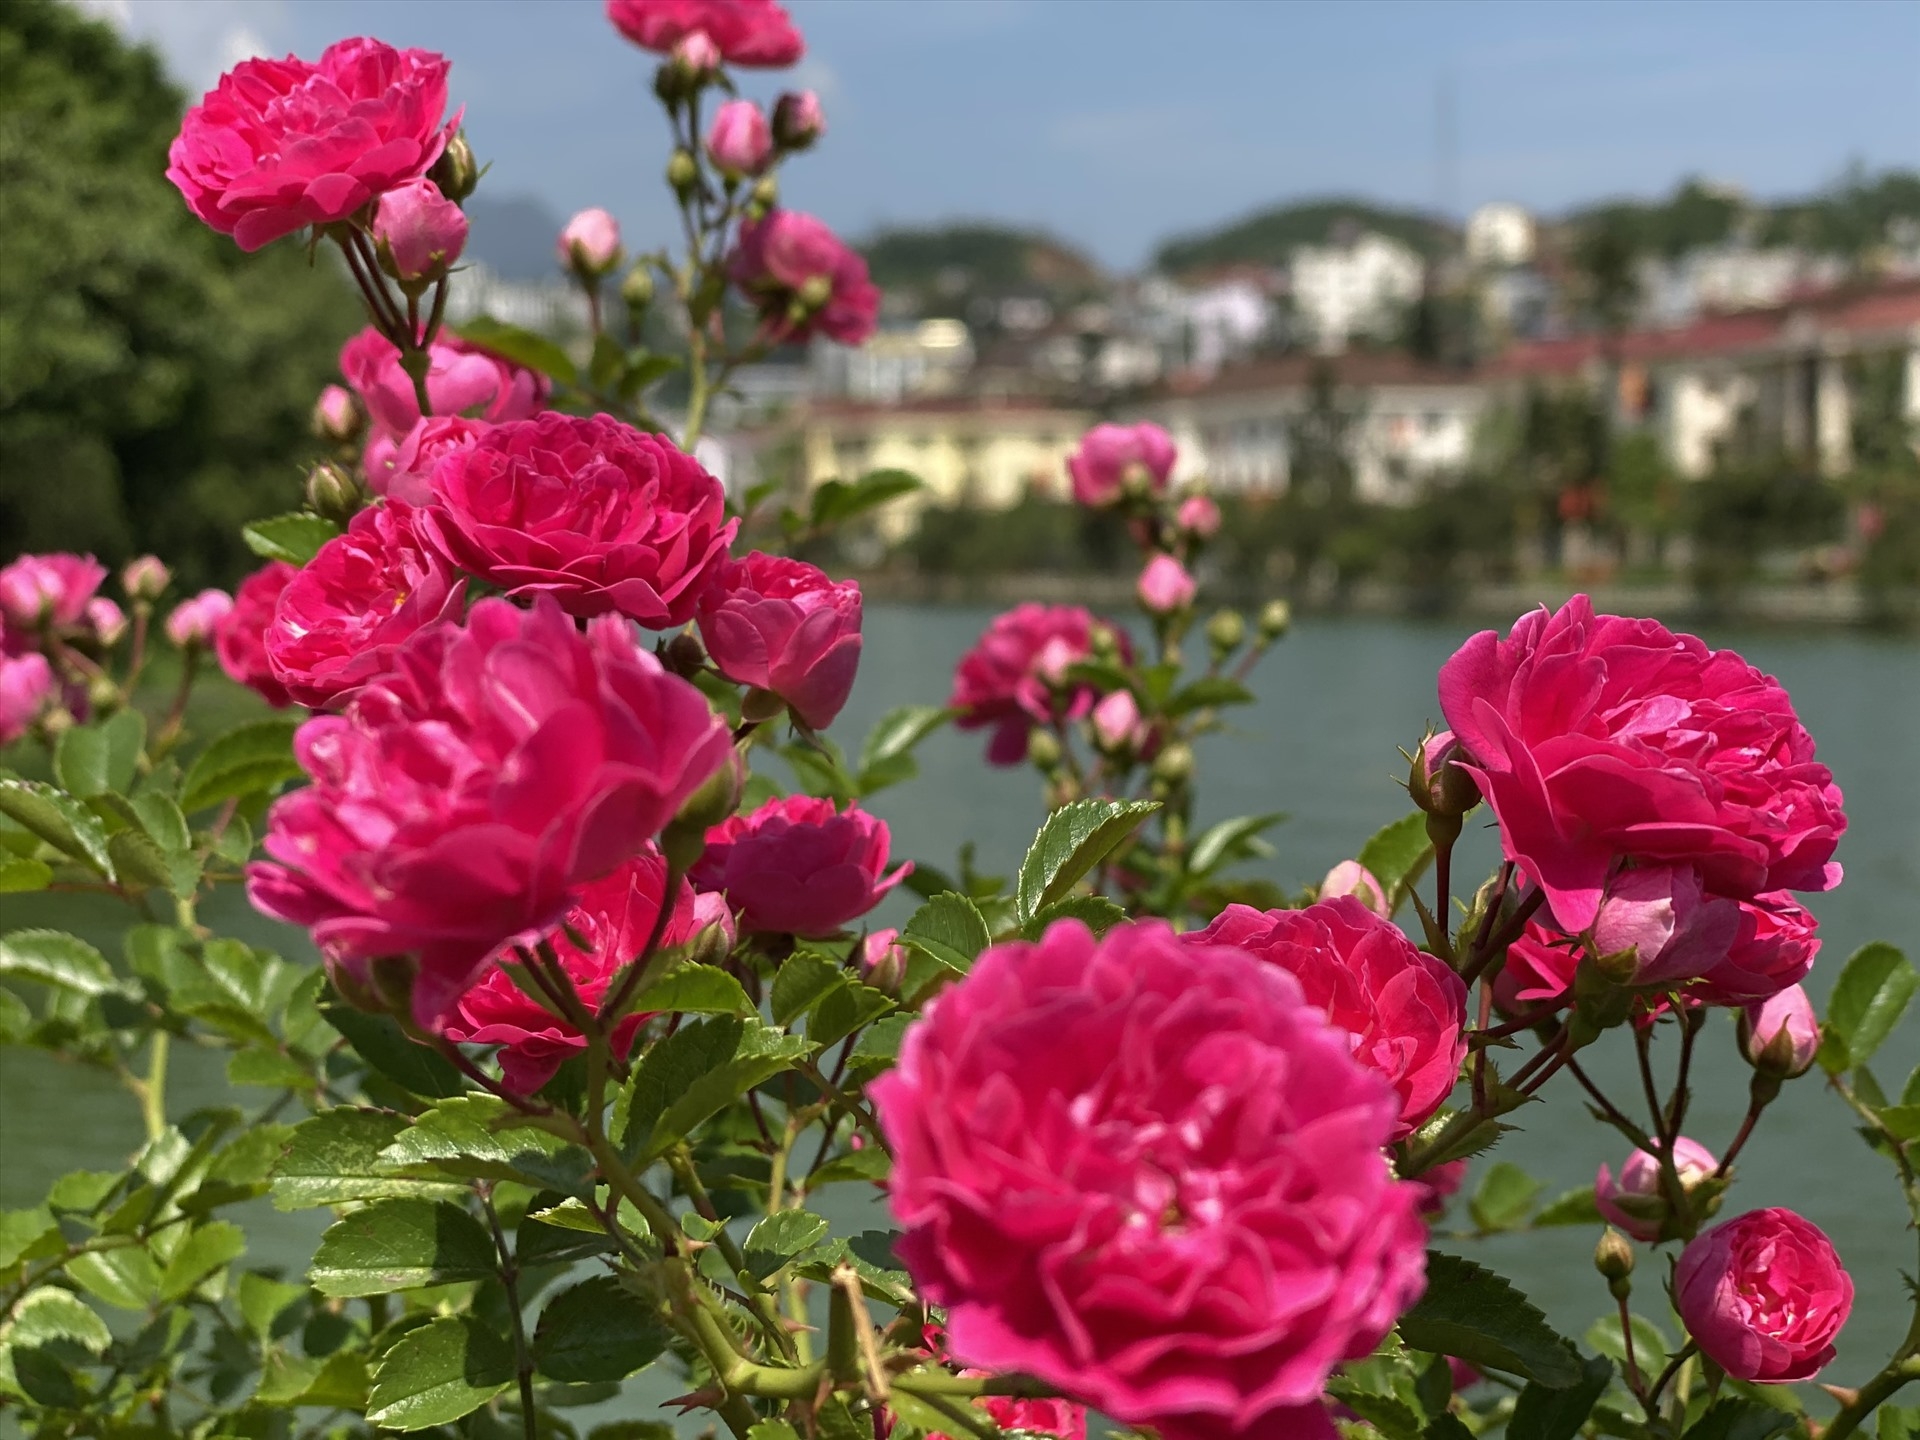 sapas rose valley recognised as largest one in vietnam